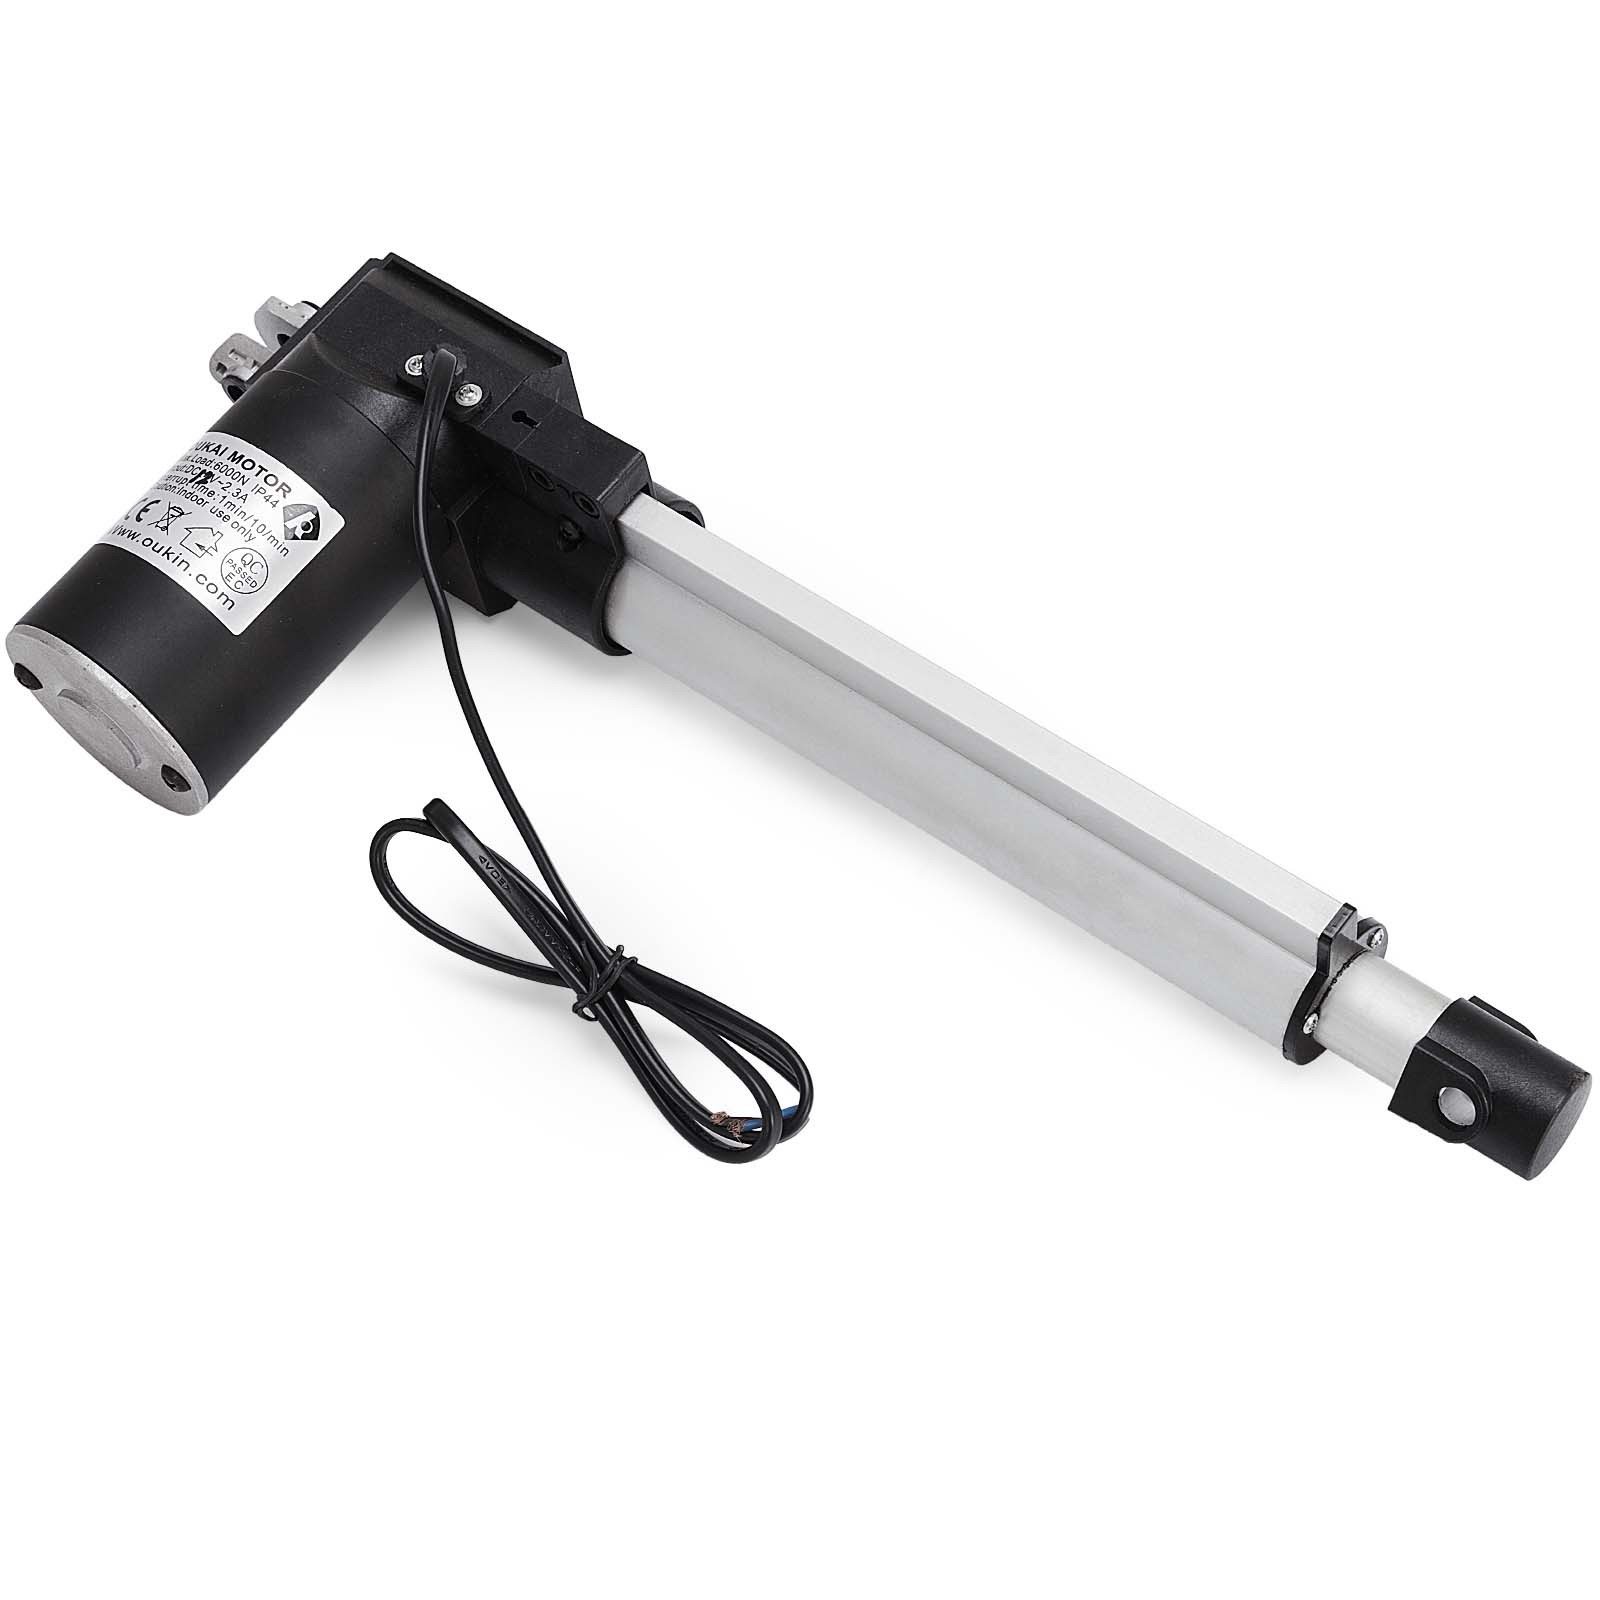 6000N 22/28" Inch Silver Linear Actuator Stroke 1320LBS Max Lift Output 12V USA 